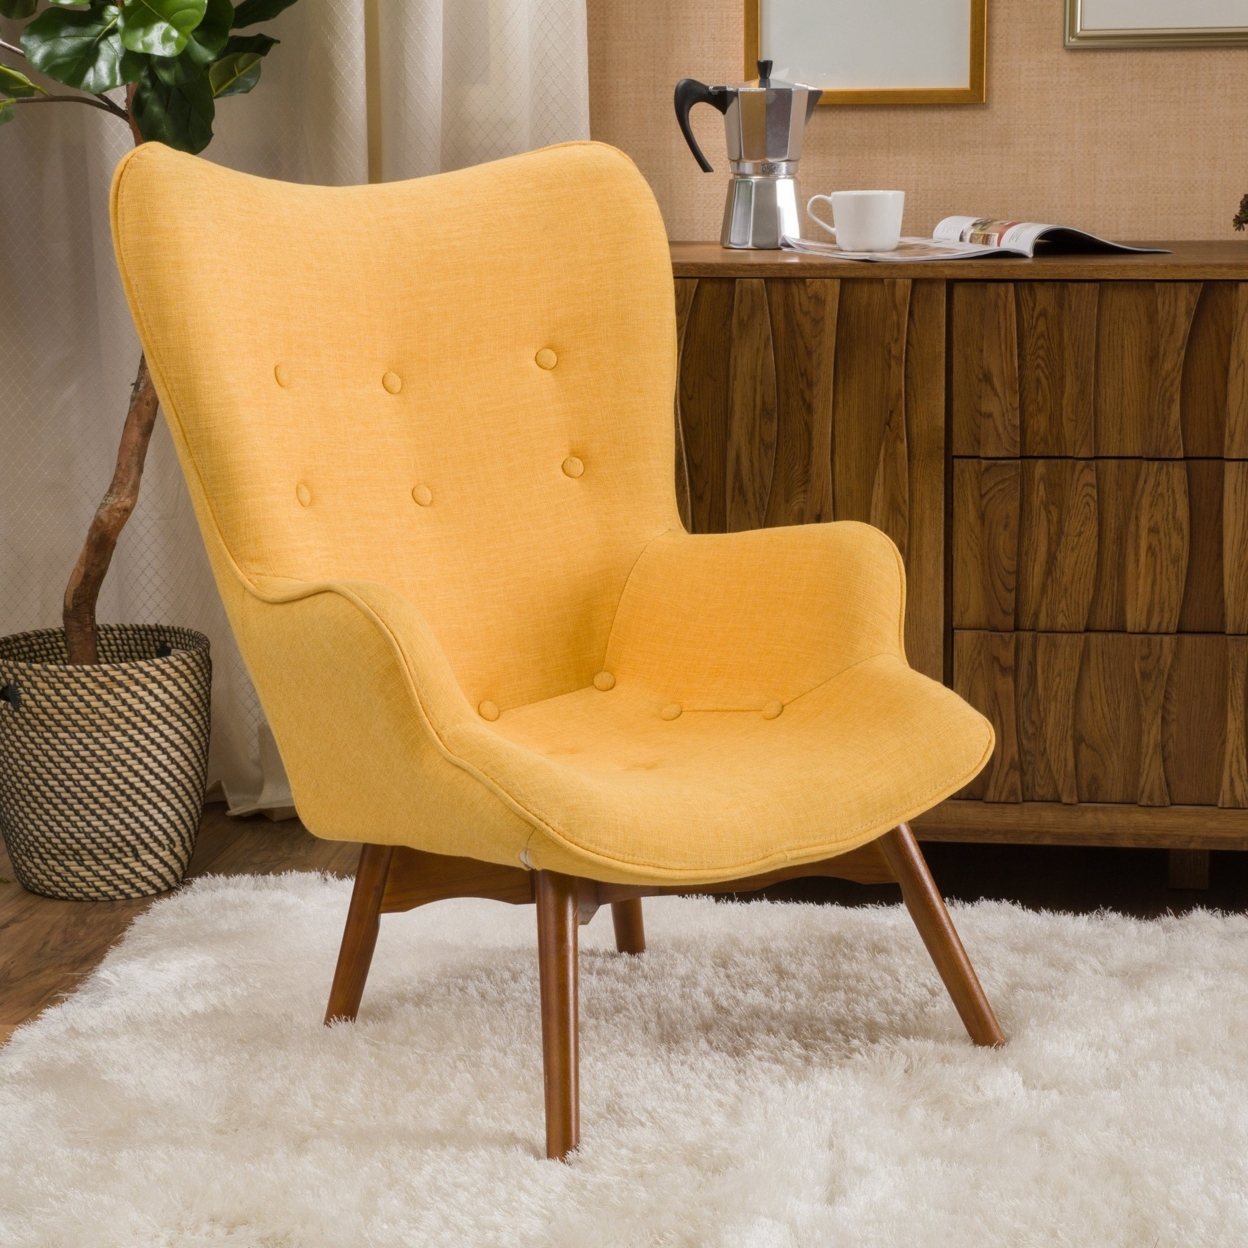 Acantha Mid Century Modern Contour Lounge Chair - Yellow